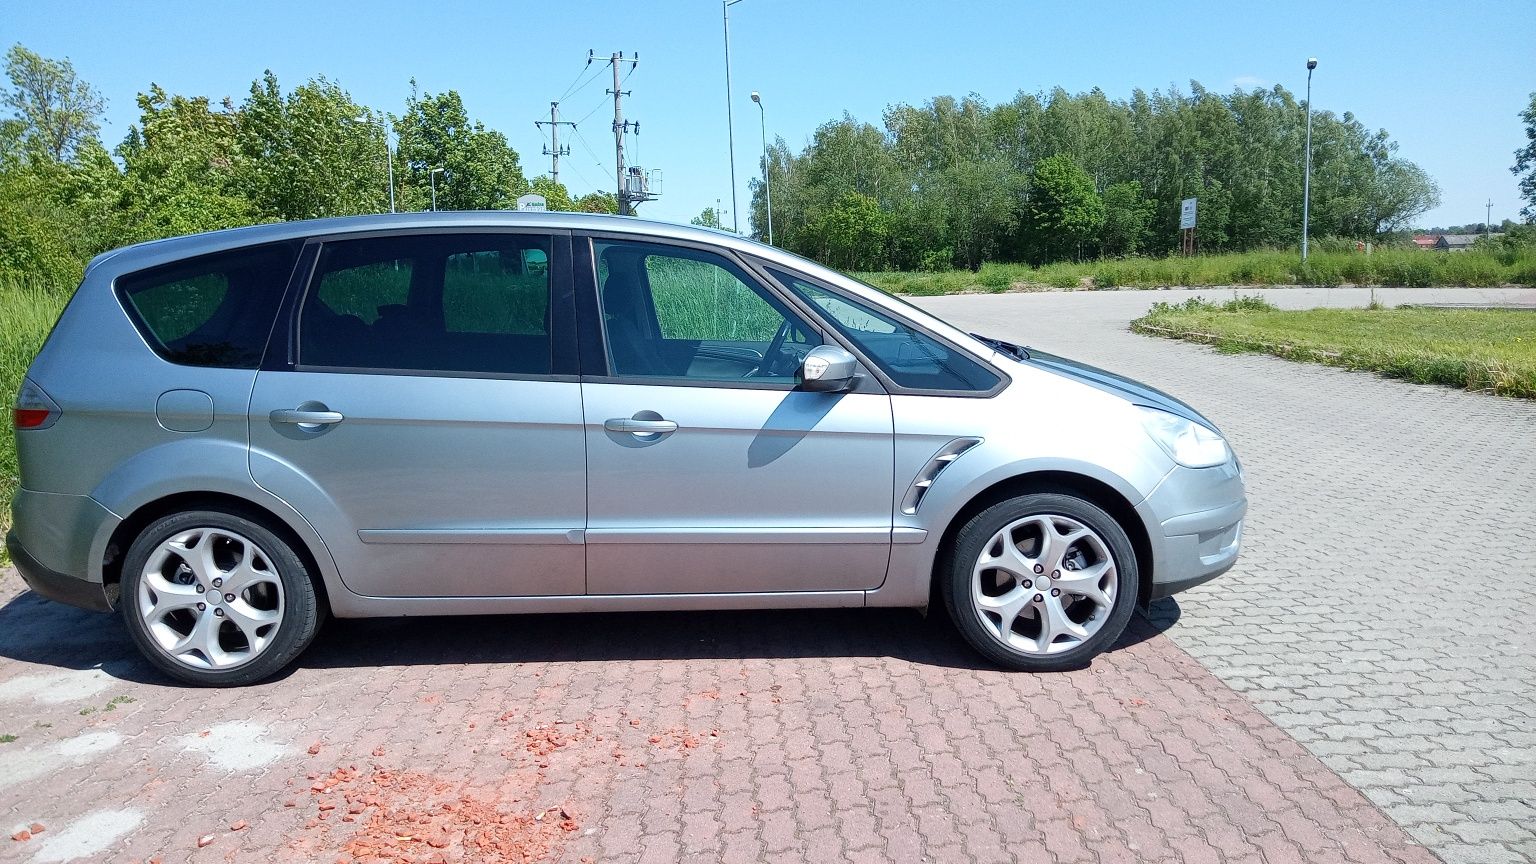 Ford Smax 2.0 benzyna 145km